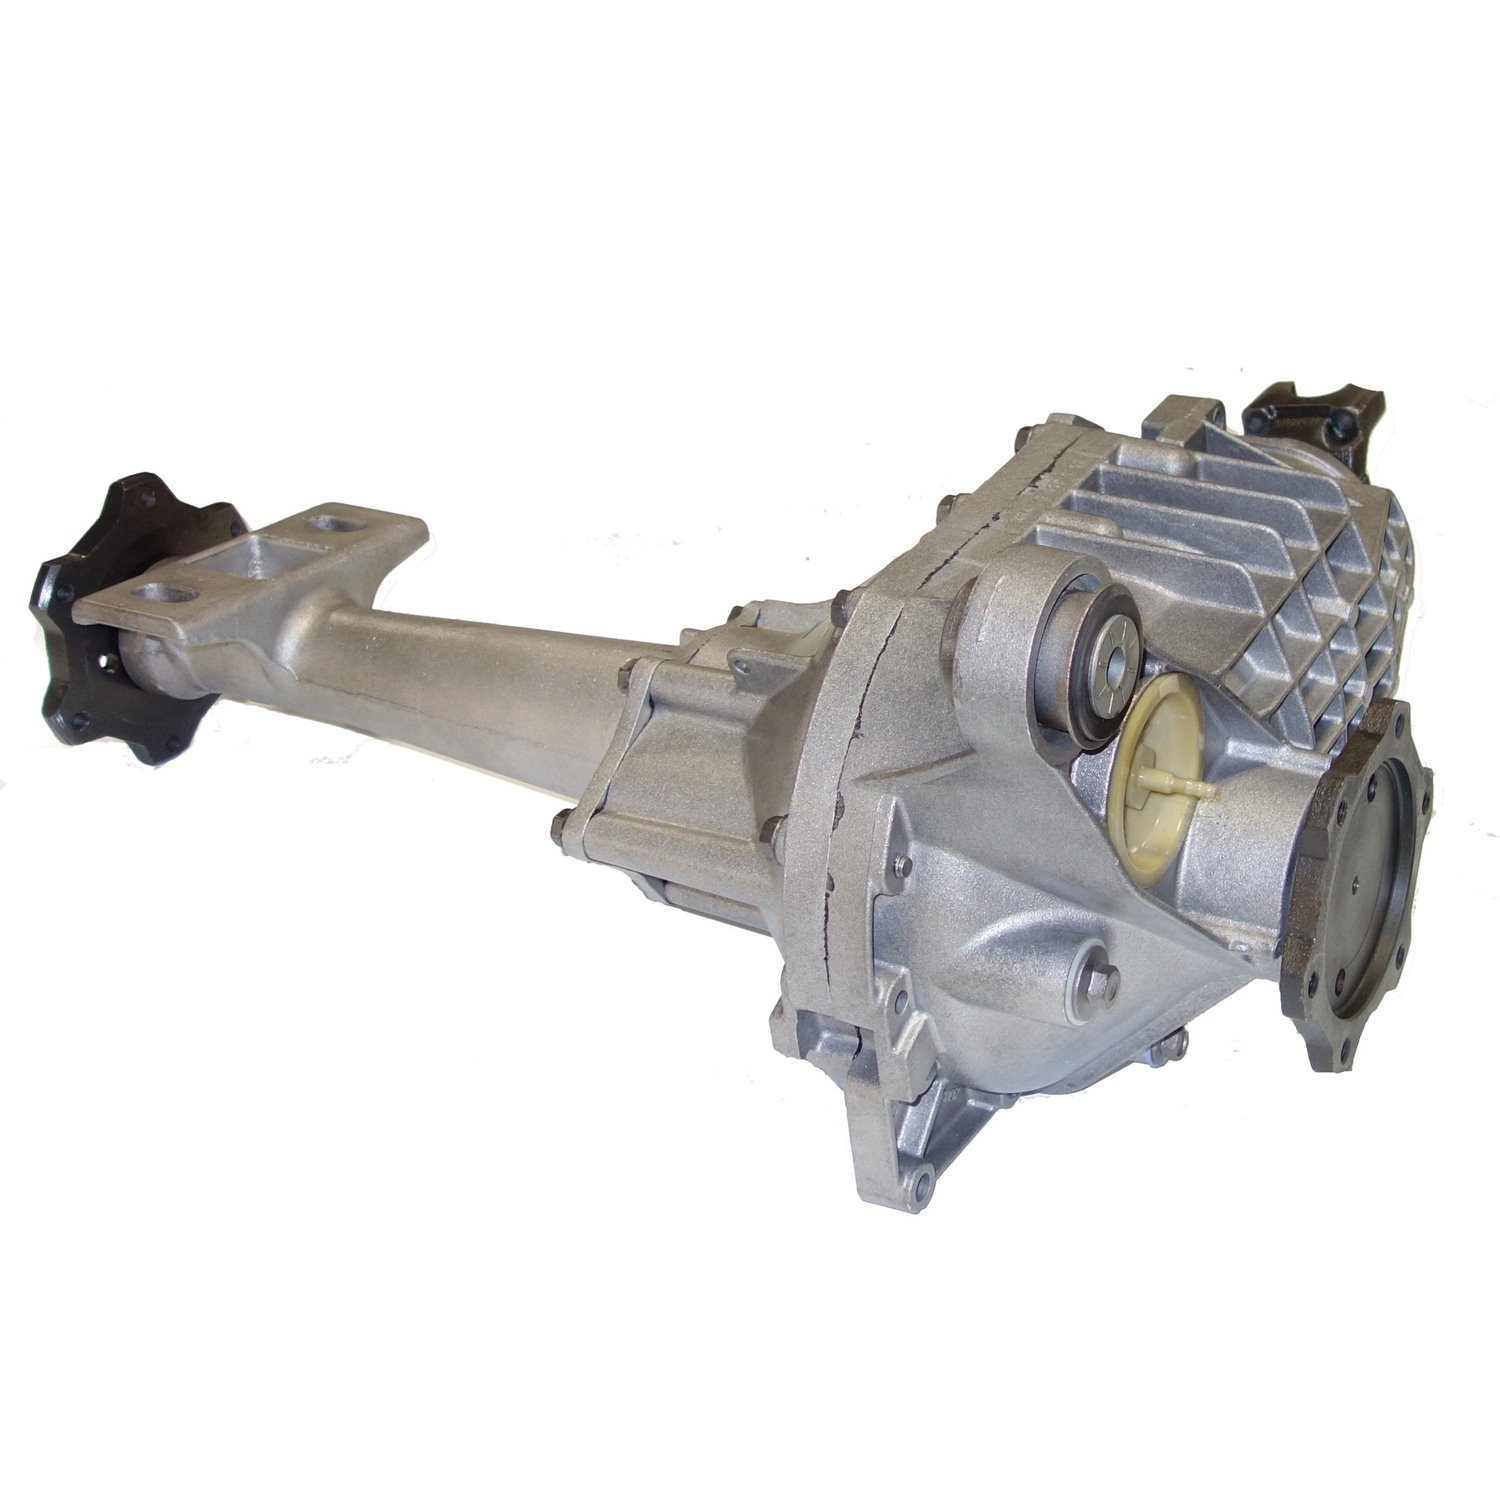 Remanufactured Axle Assembly for GM 8.25